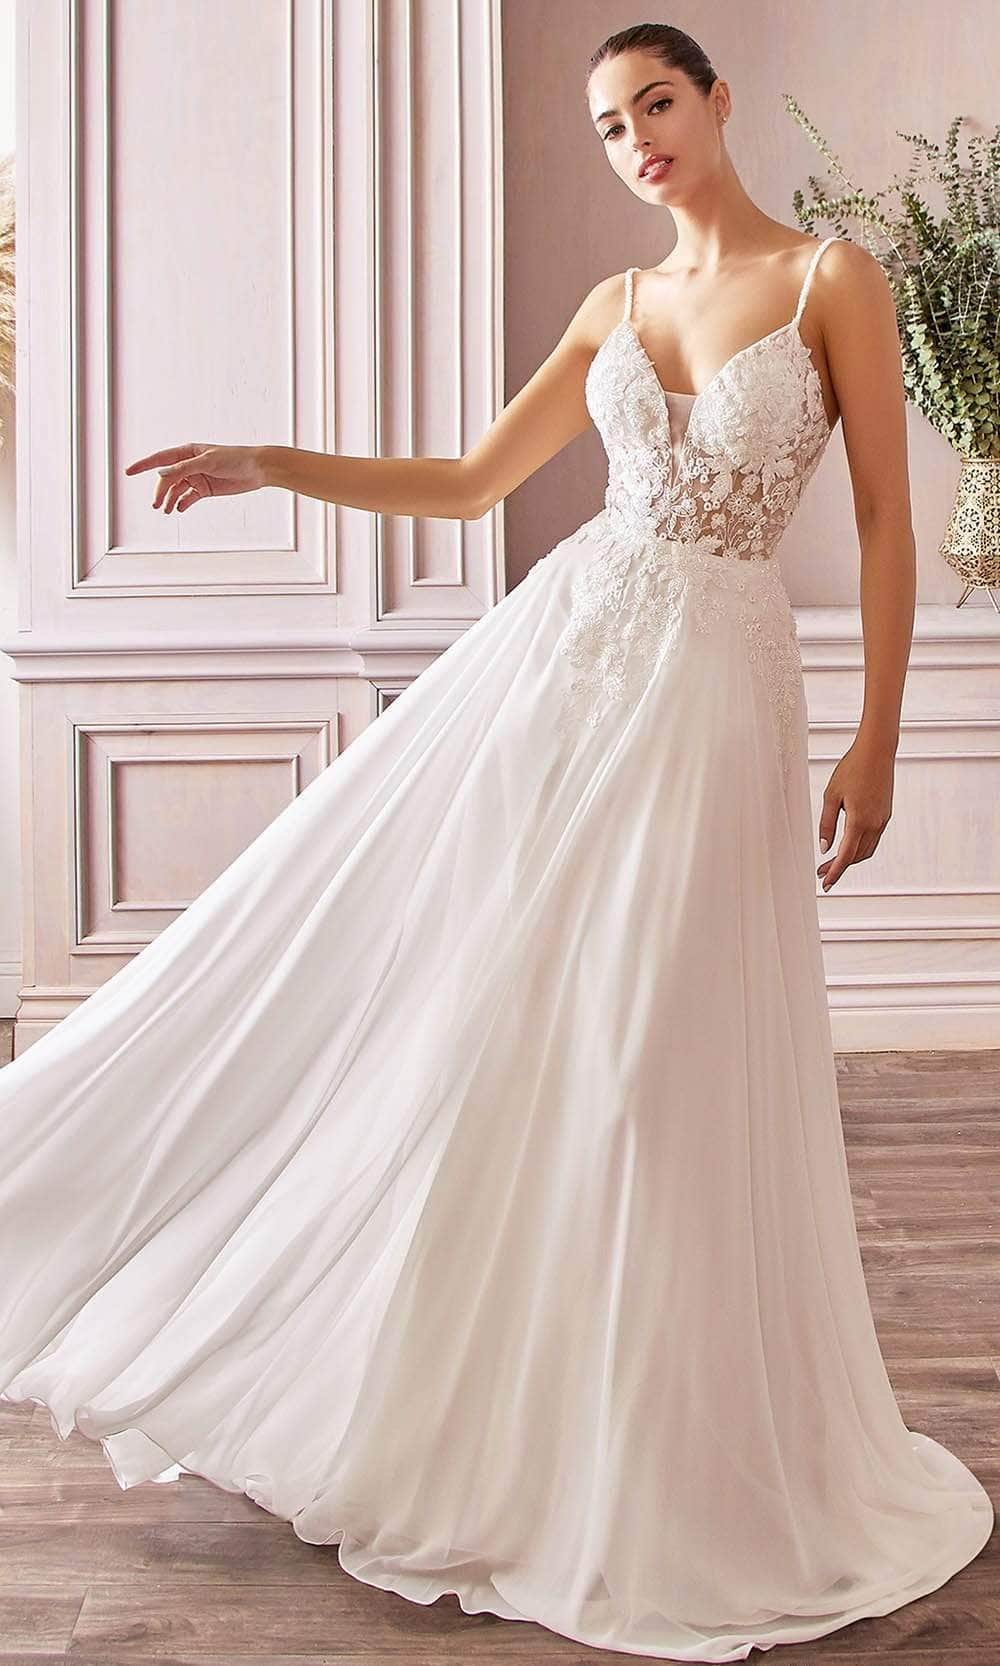 Image of Ladivine Bridals - TY11 Sheer Floral Chiffon Bridal Gown